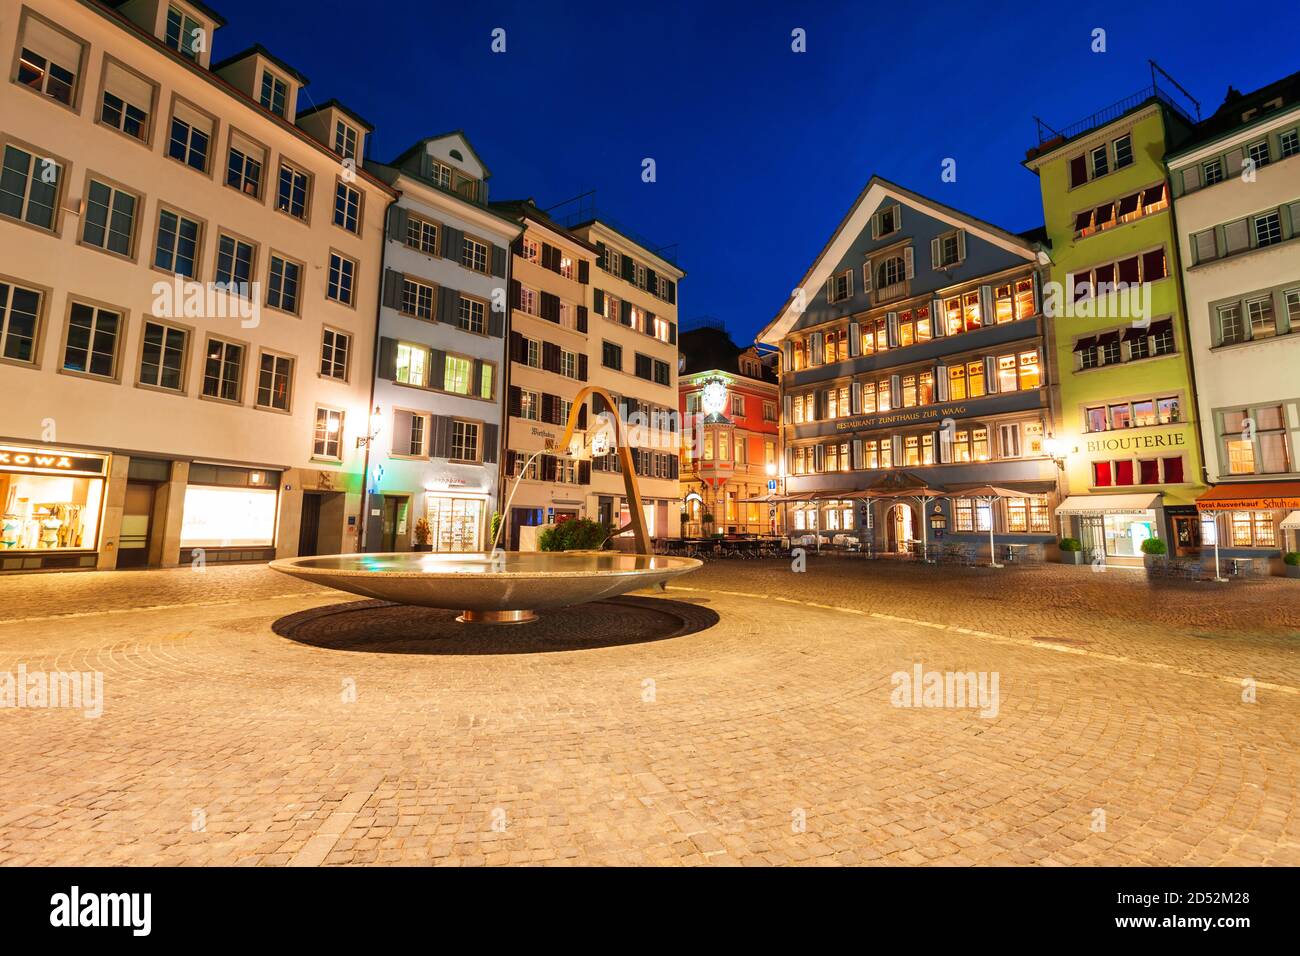 ZURICH, SWITZERLAND - JULY 08, 2019: Colorful houses at the Munsterhof main square in the centre of Zurich city in Switzerland Stock Photo